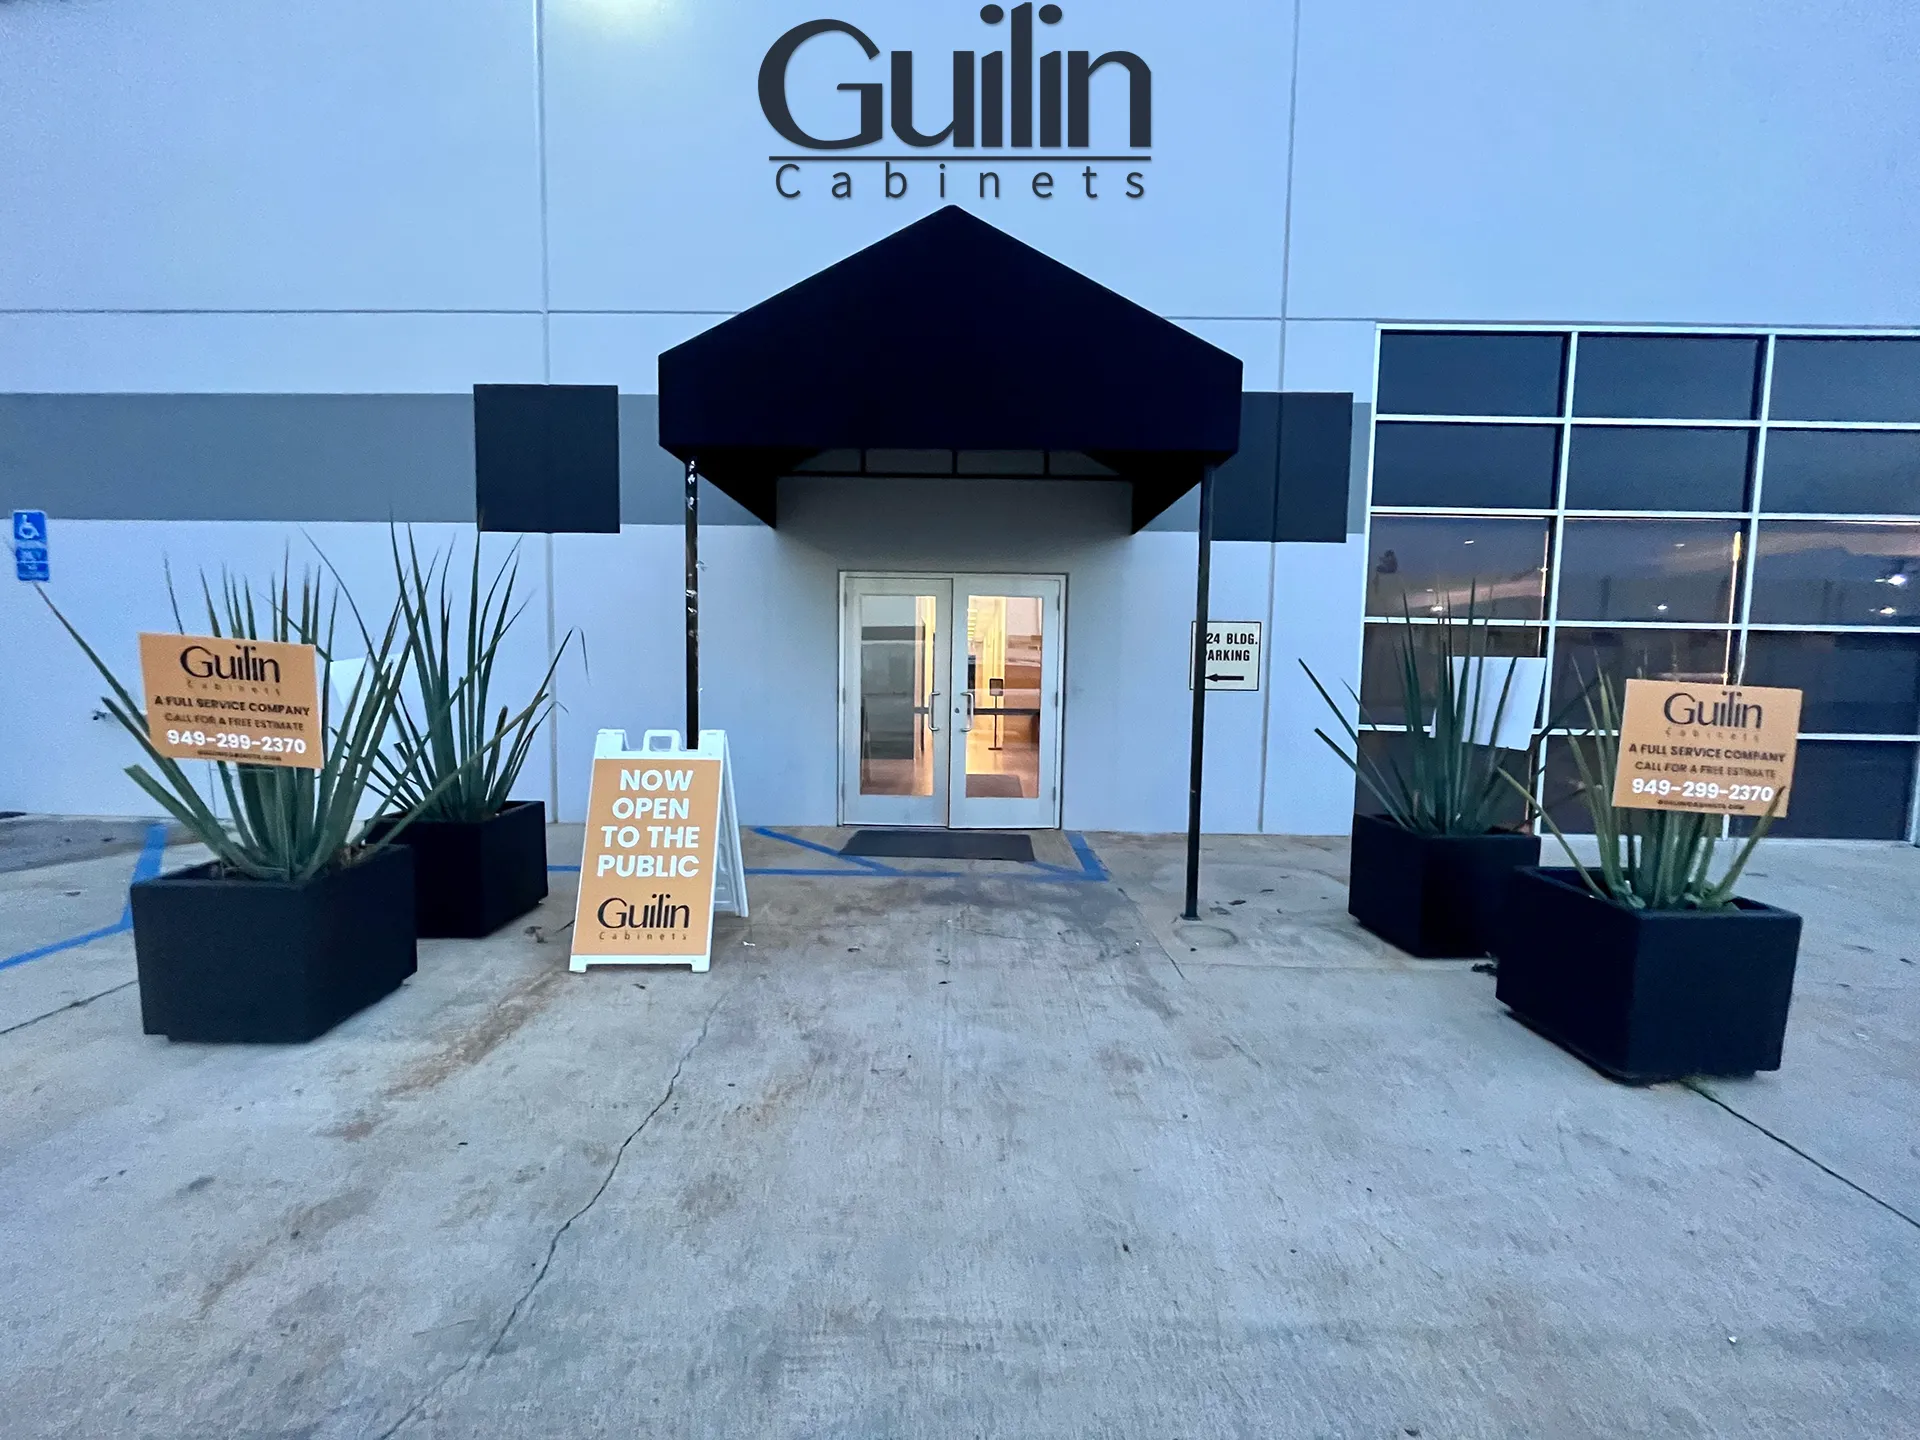 Guilin Cabinets is a cabinet maker and remodeling company based out of Irvine, California. Our company is devoted to providing high-quality custom cabinetry, closets, bathrooms, and kitchens.